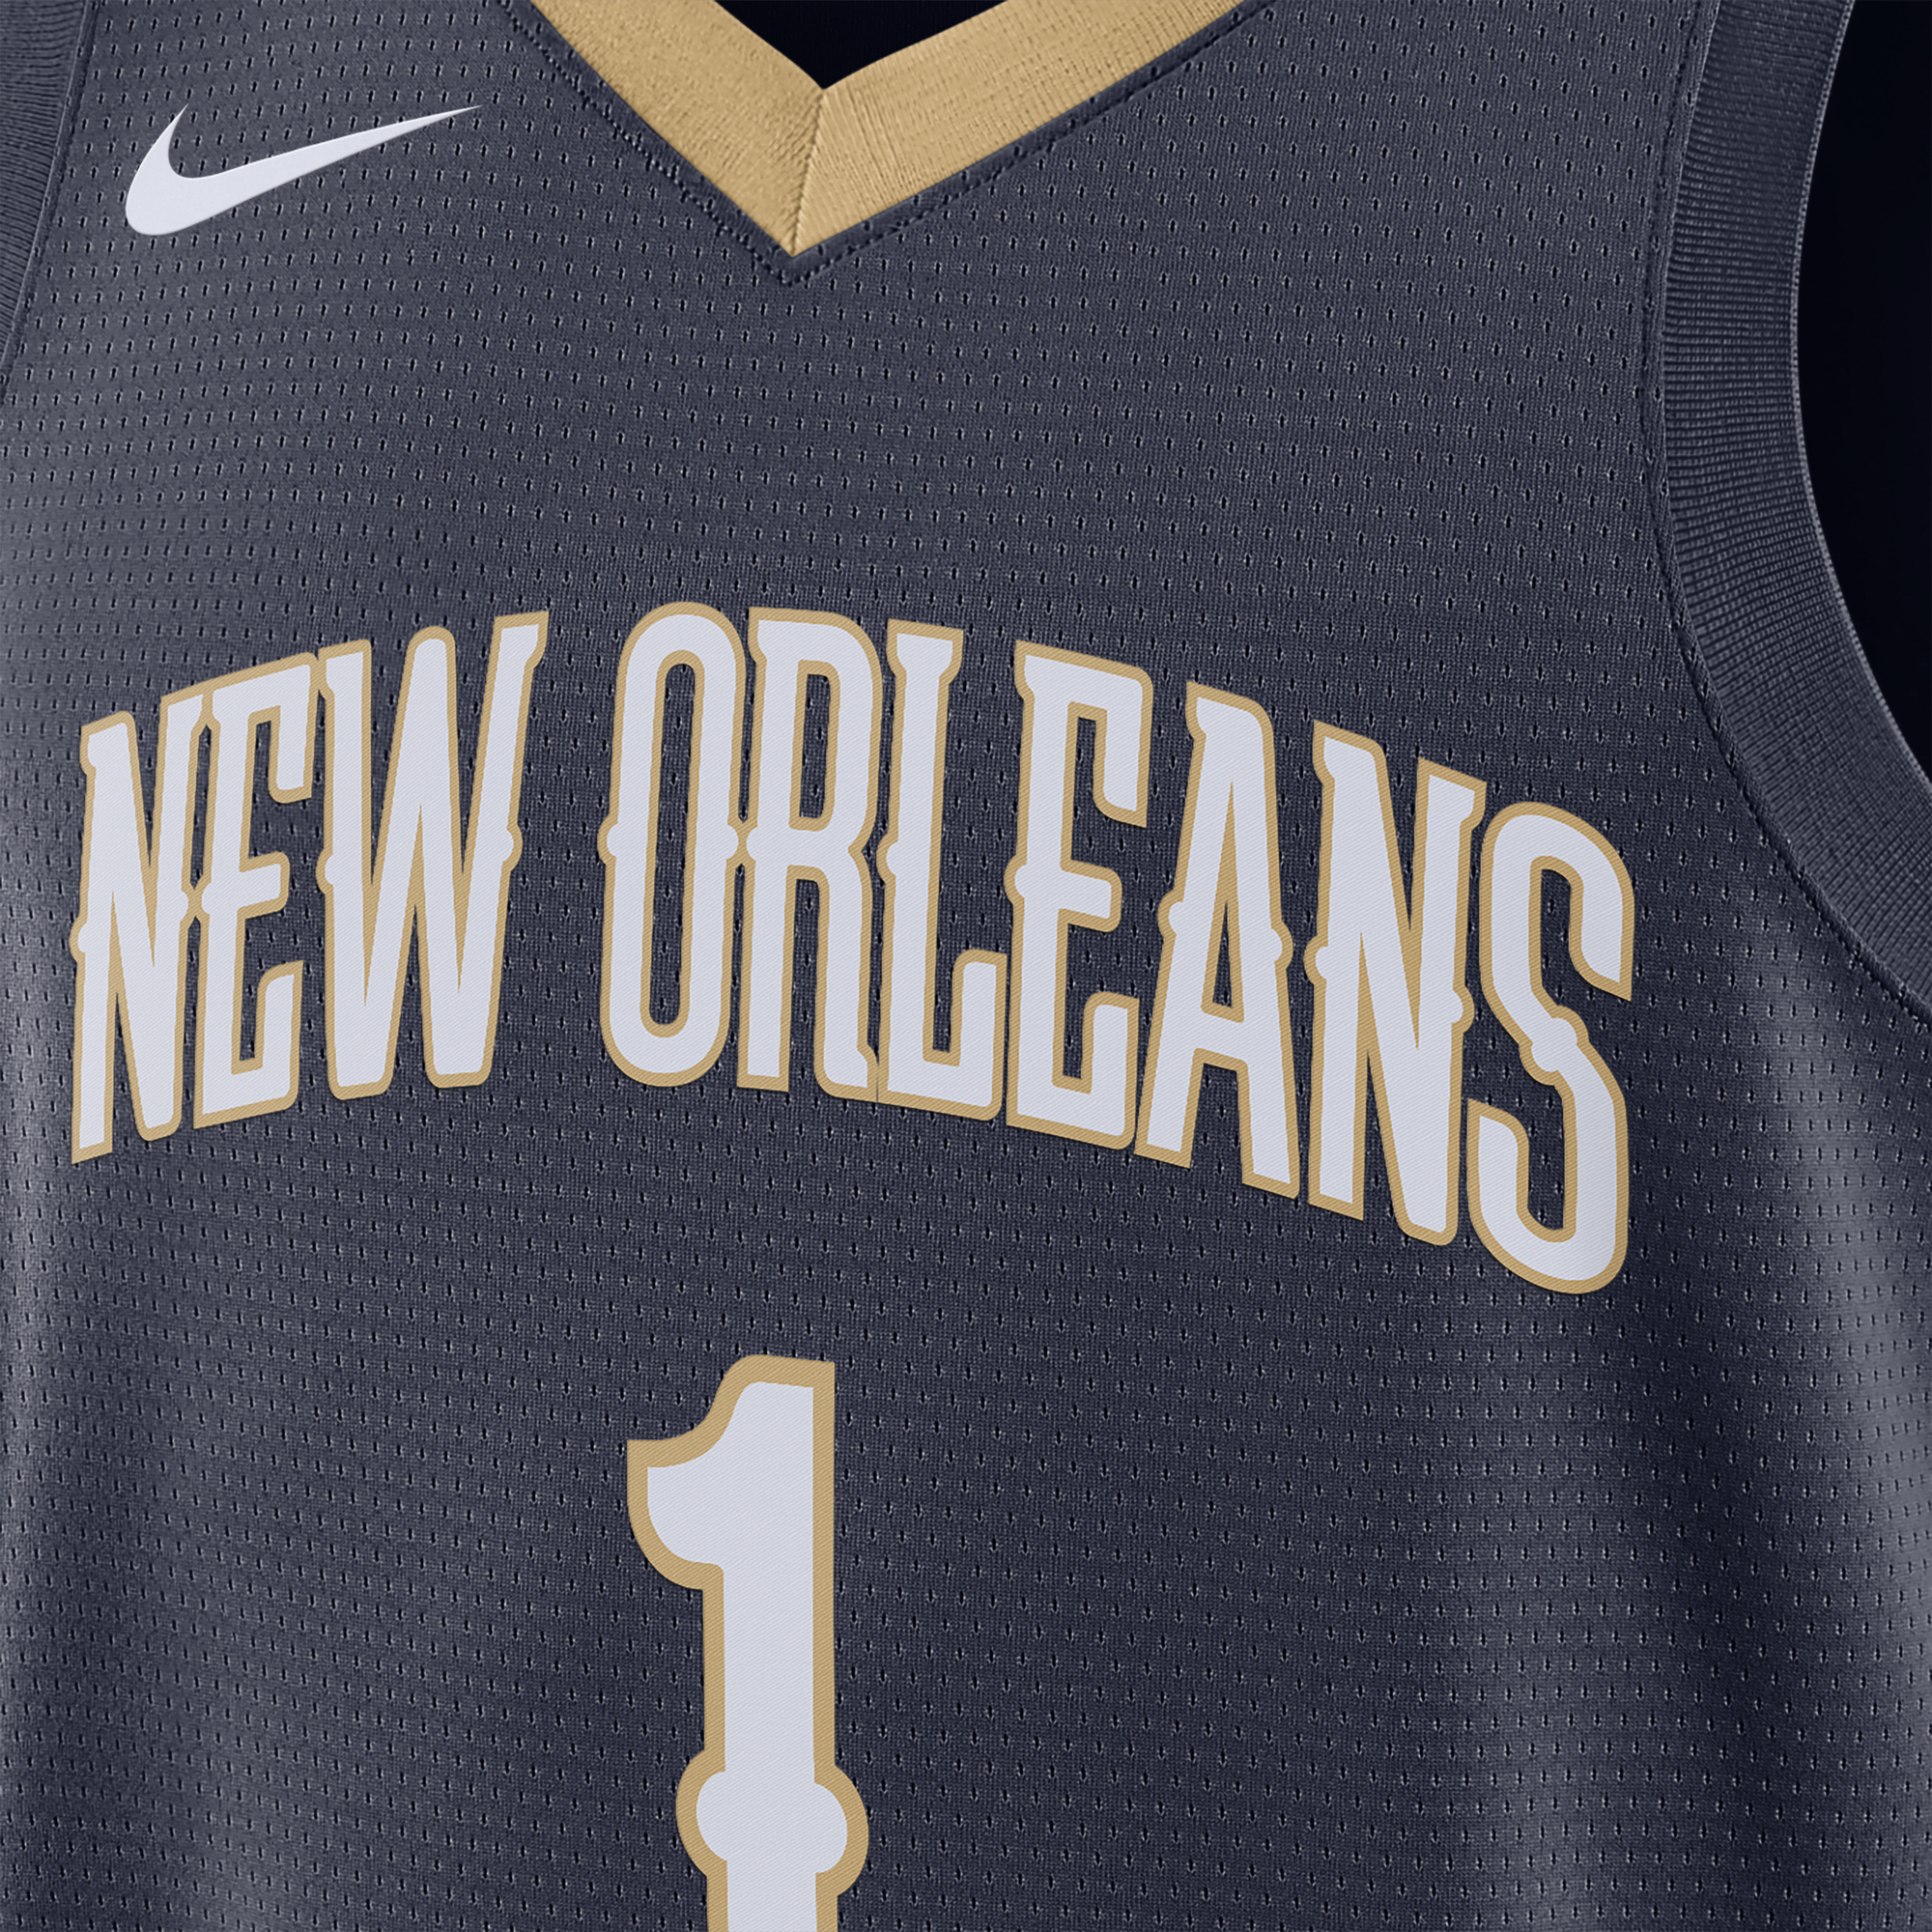 Nike, Shirts & Tops, Zion Williamson New Orleans Pelicans Youth Jersey